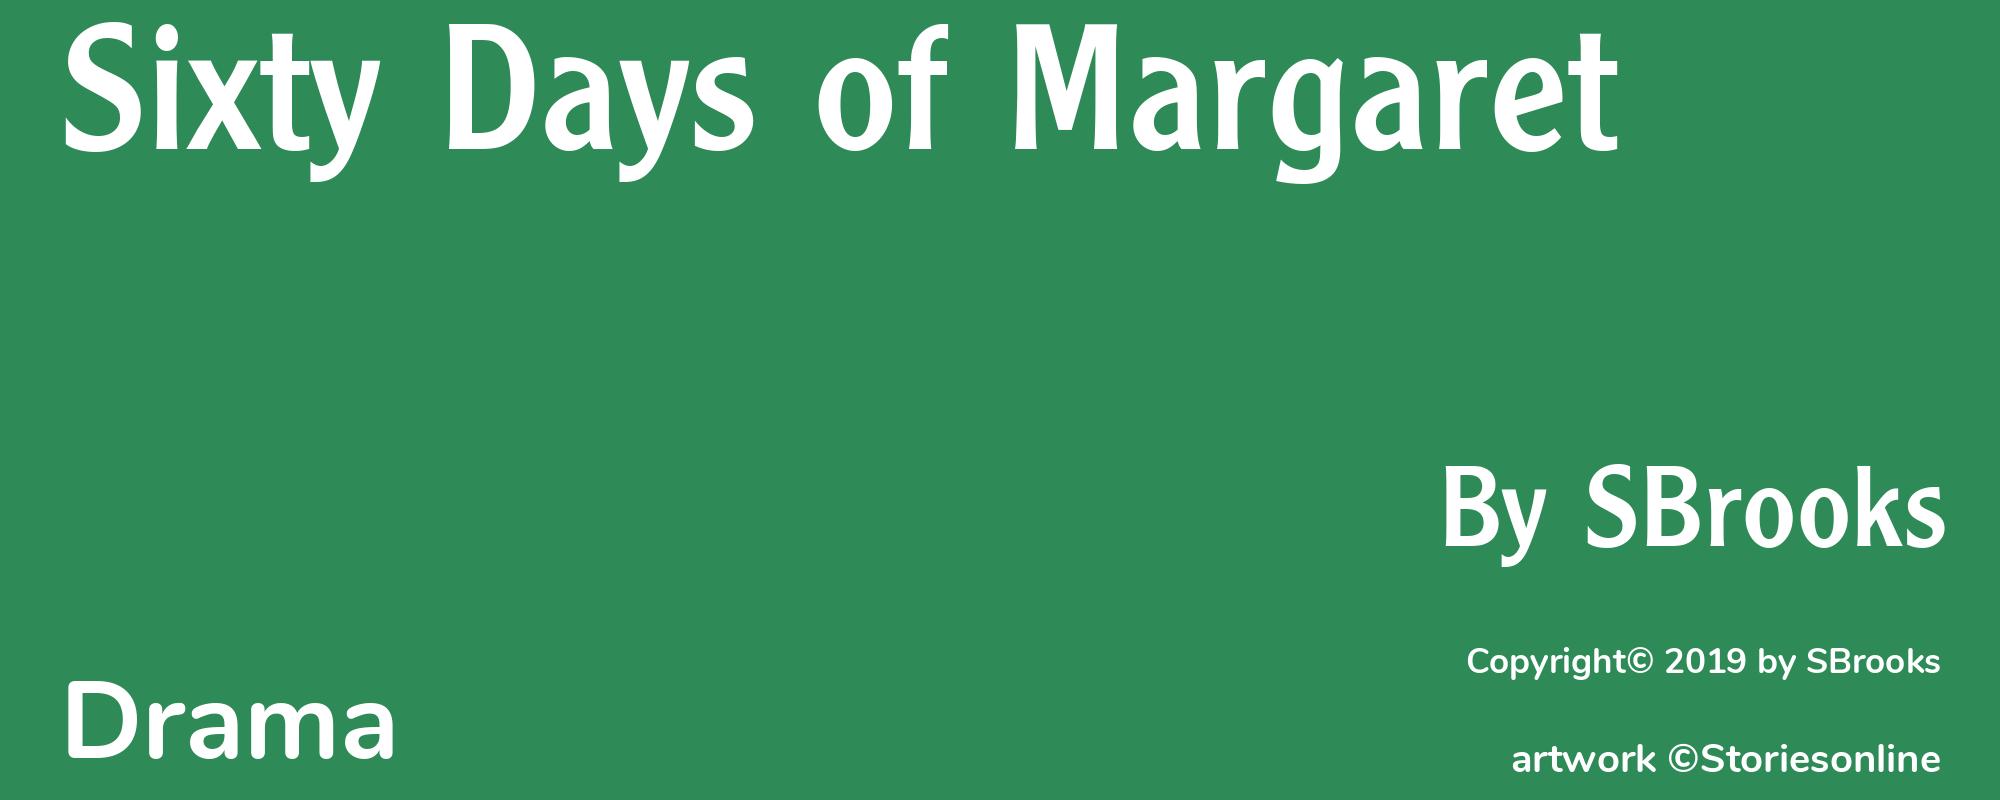 Sixty Days of Margaret - Cover